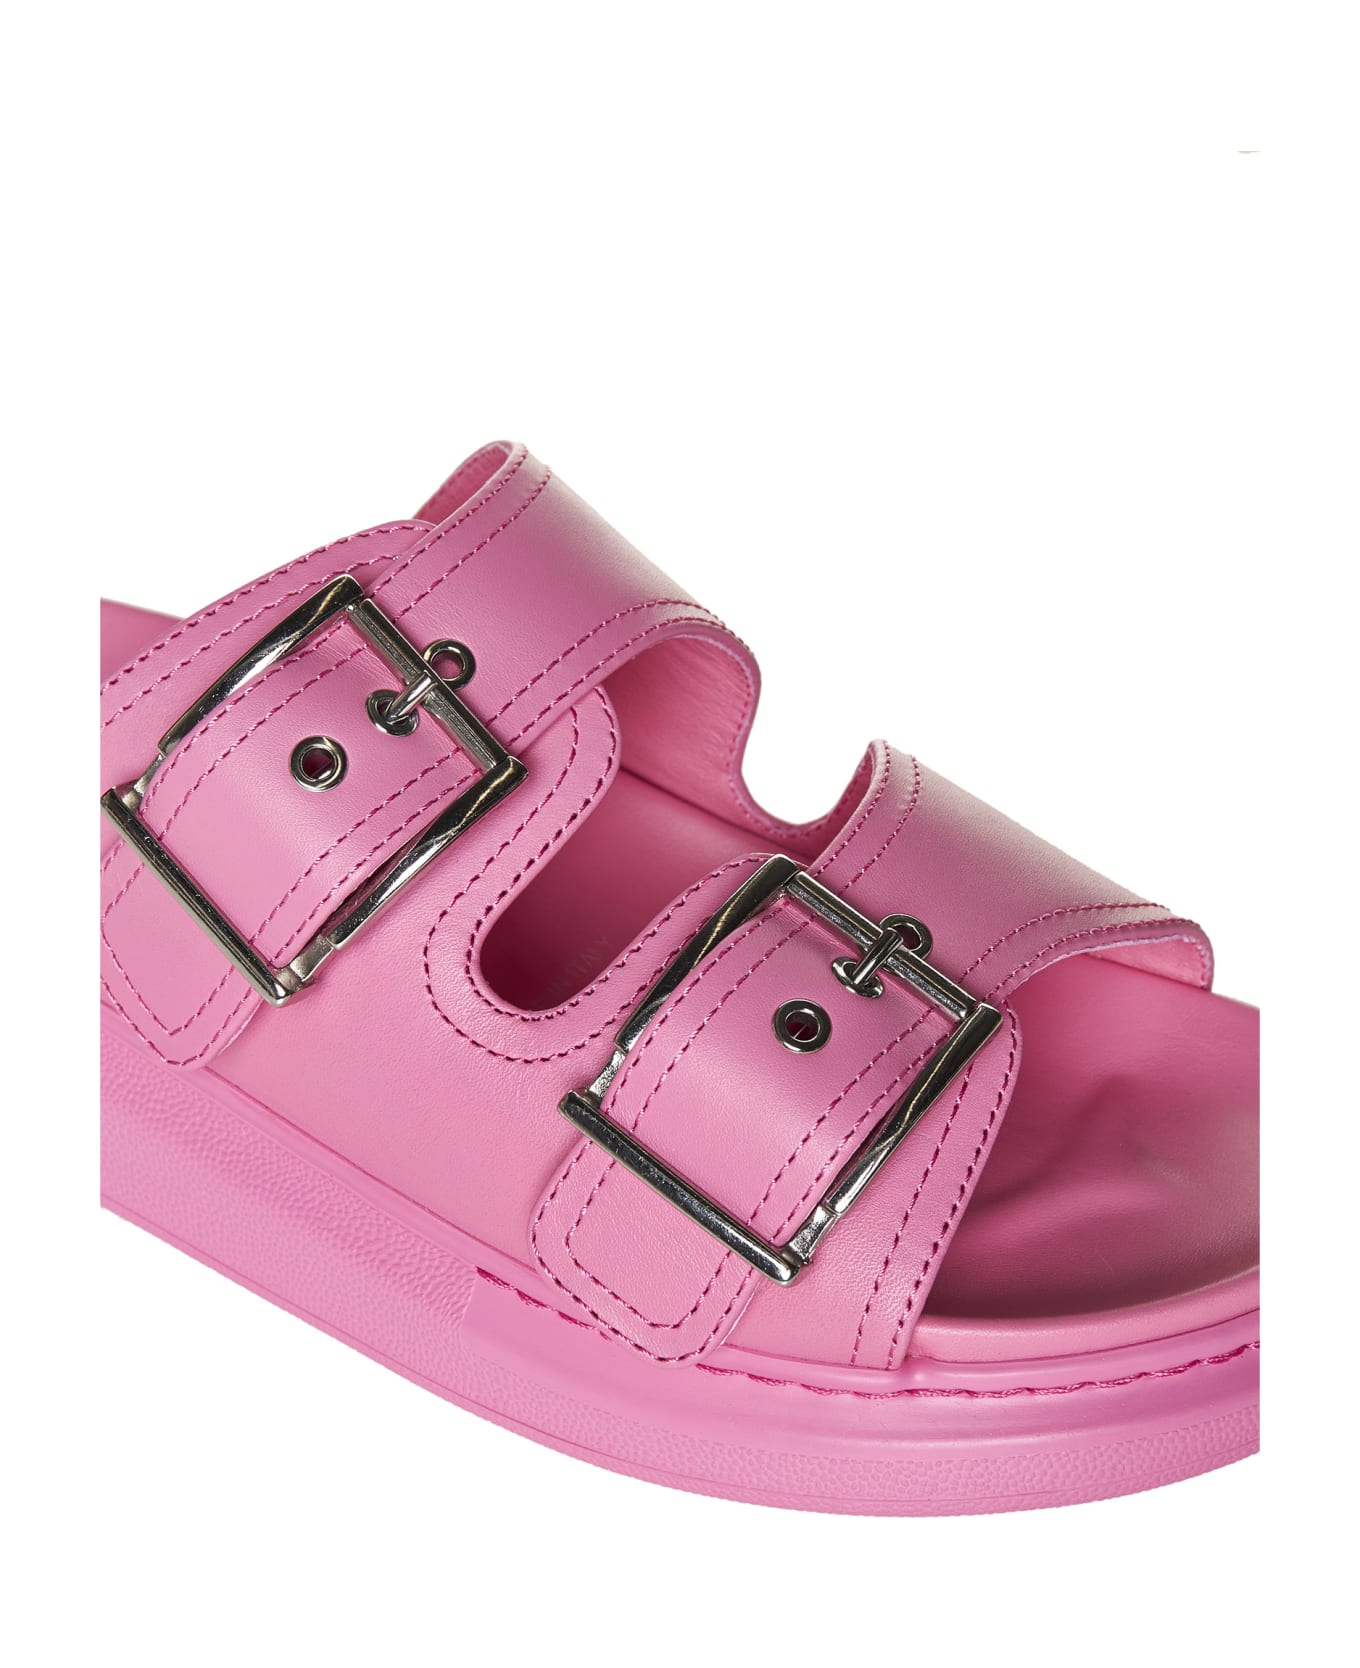 Alexander McQueen Pink And Silver Hybrid Sandal - It was only matter of time till KISS was featured on a pair of sneakers